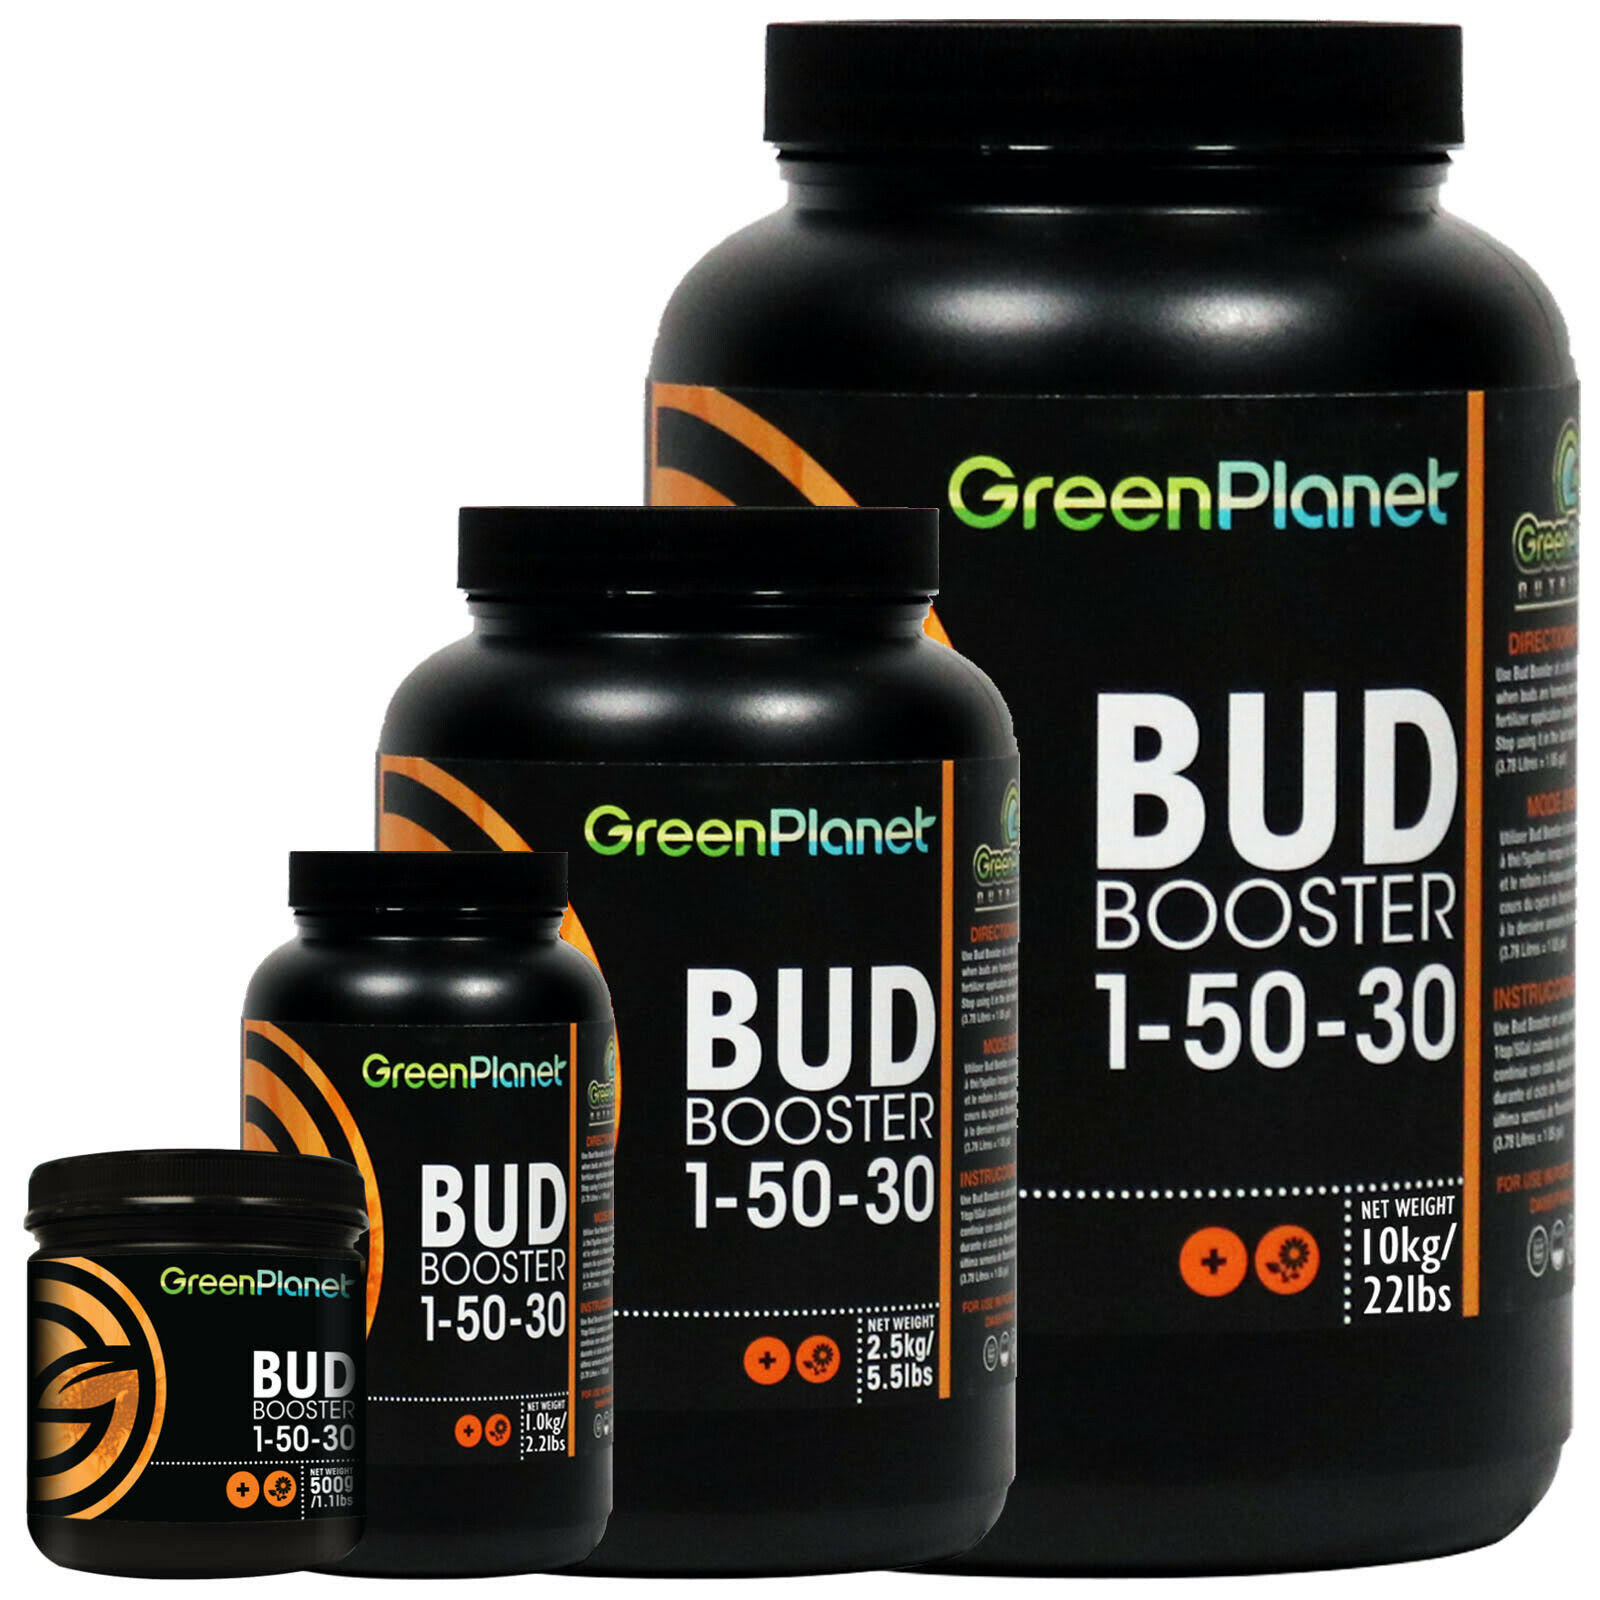 GreenPlanet Bud Booster Plant Additives Boosting Flowering Nutrients Hydroponics